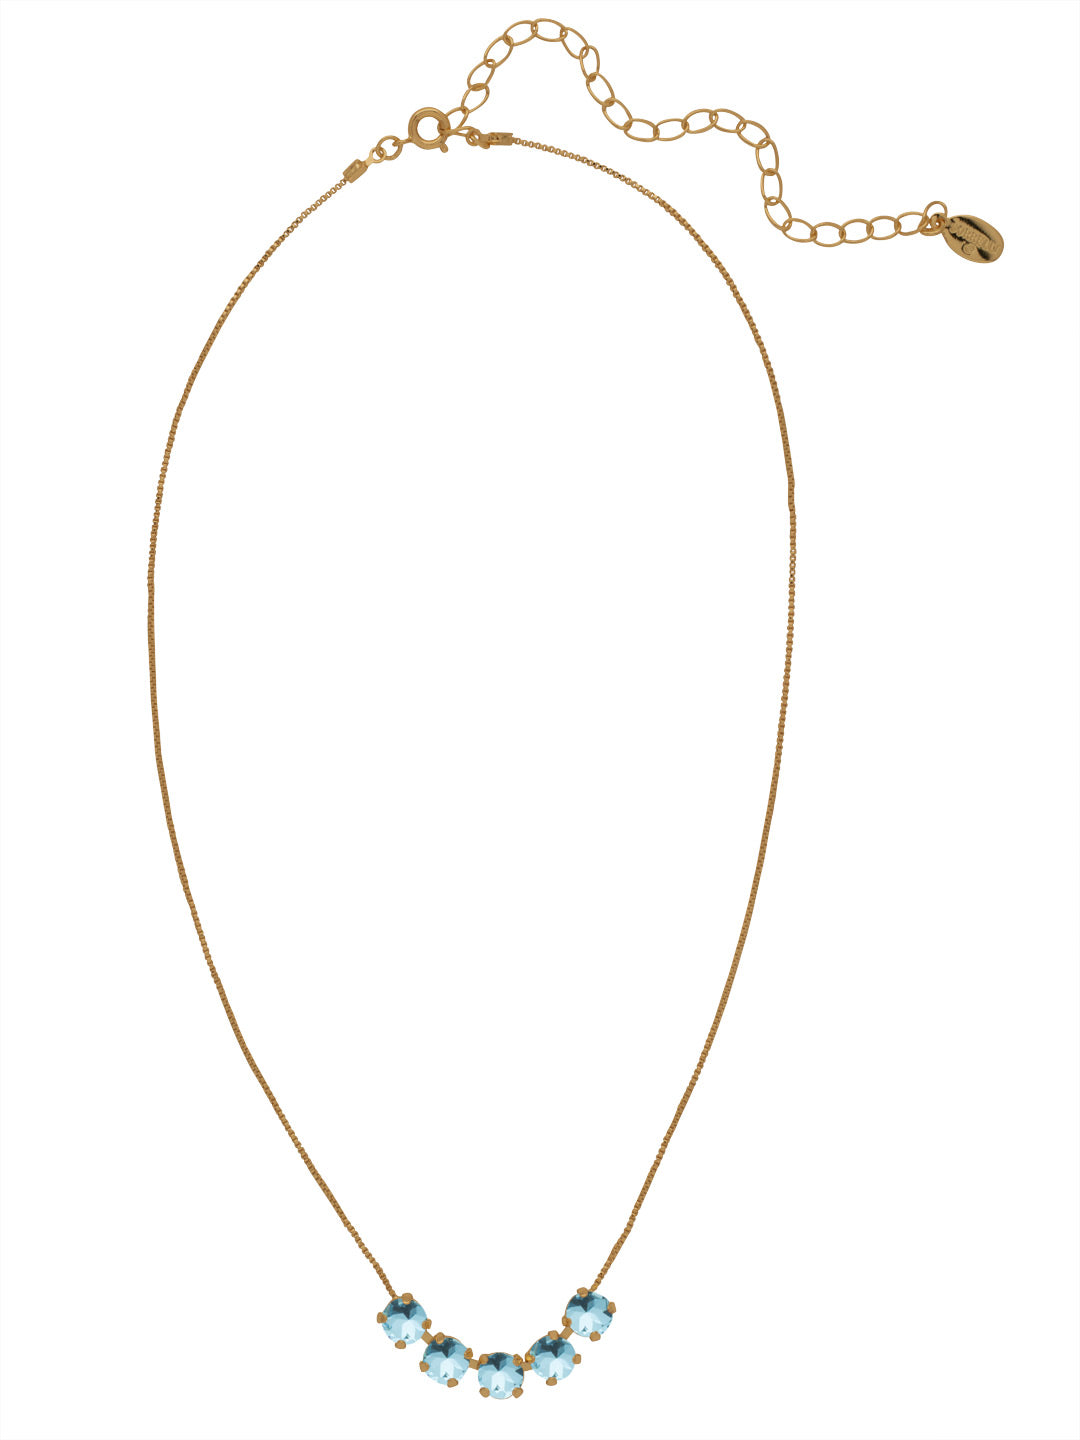 Shaughna Tennis Necklace - NFC84AGAQU - <p>The Shaughna Tennis Necklace features five crystals on a delicate adjustable chain. From Sorrelli's Aquamarine collection in our Antique Gold-tone finish.</p>